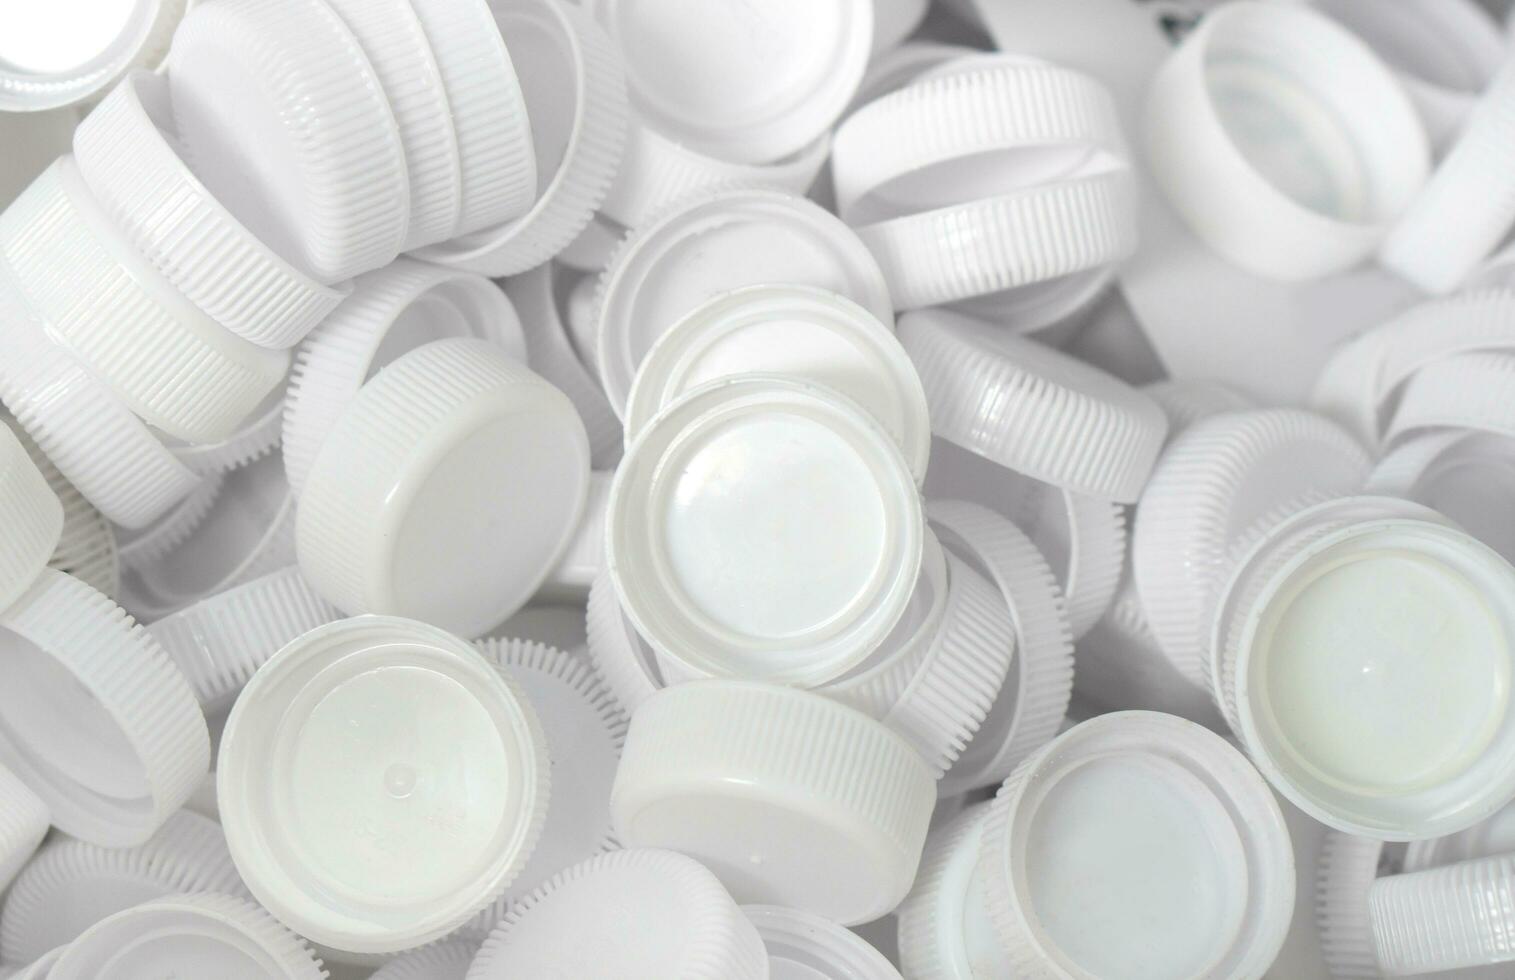 The plastic lid that is left over from the bottles are collected to be recycled into other items for reuse. photo